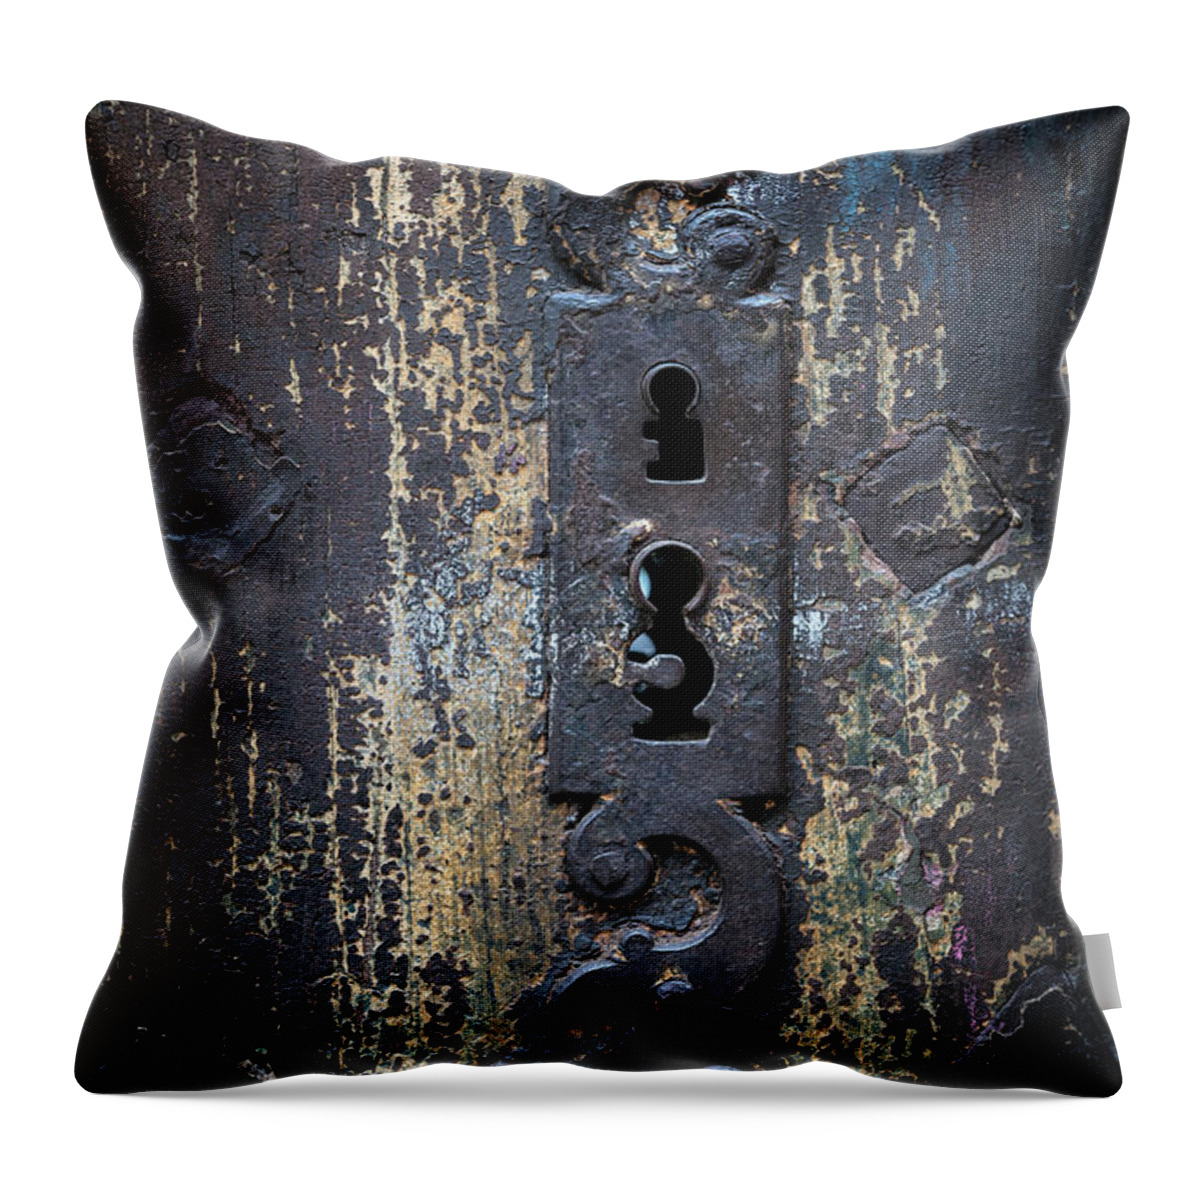 Keyhole Throw Pillow featuring the photograph Antique door lock detail by Elena Elisseeva